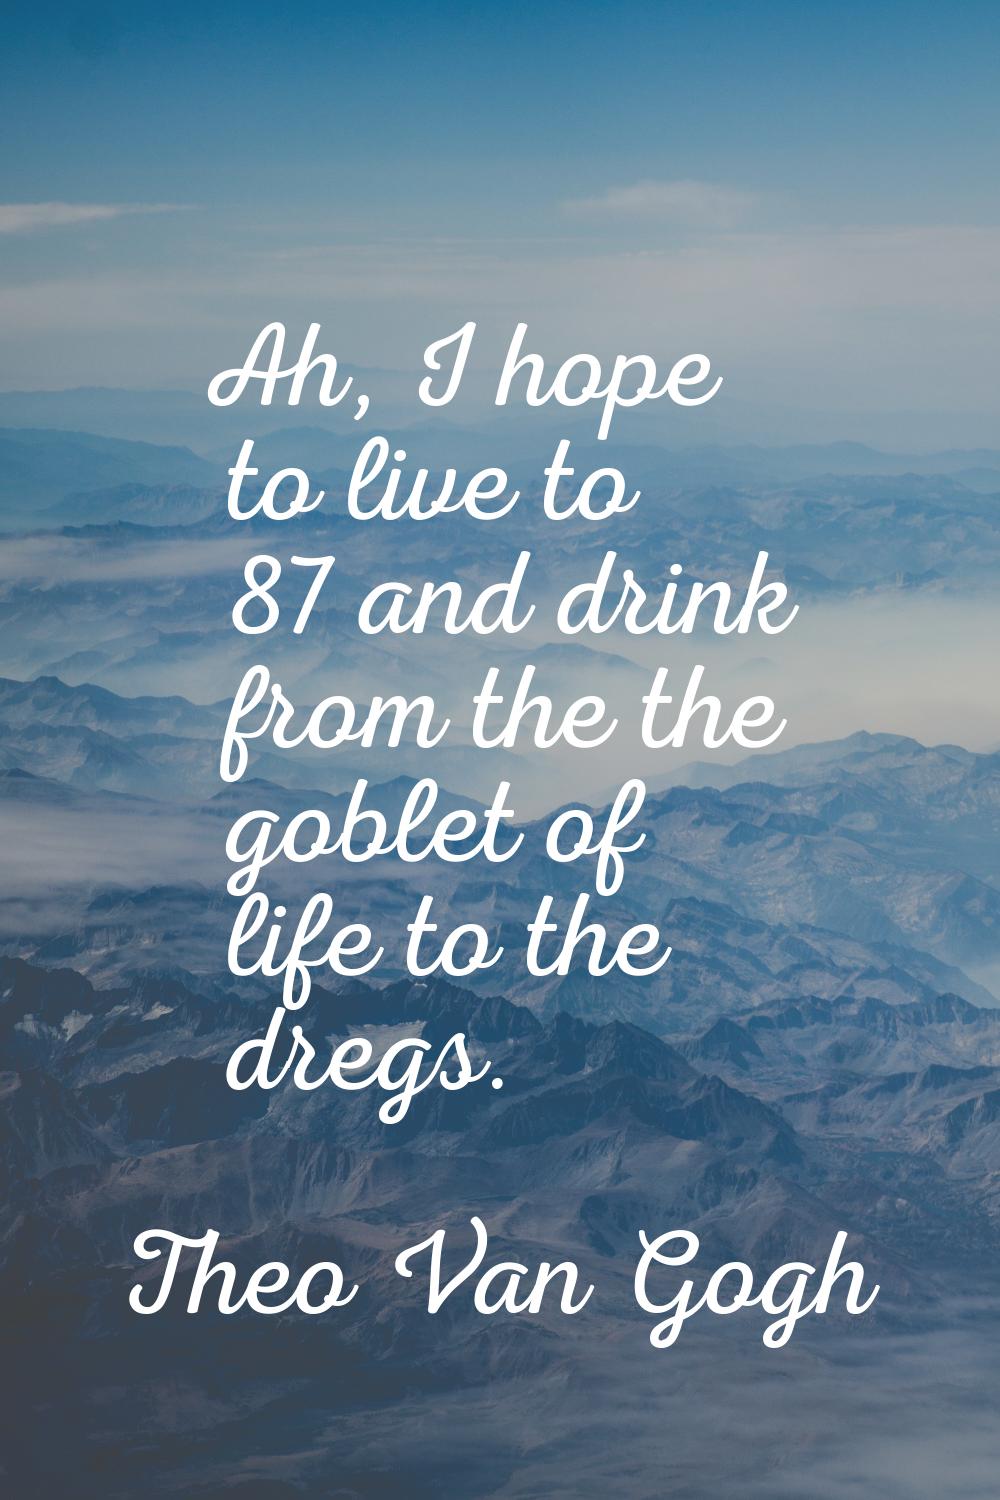 Ah, I hope to live to 87 and drink from the the goblet of life to the dregs.